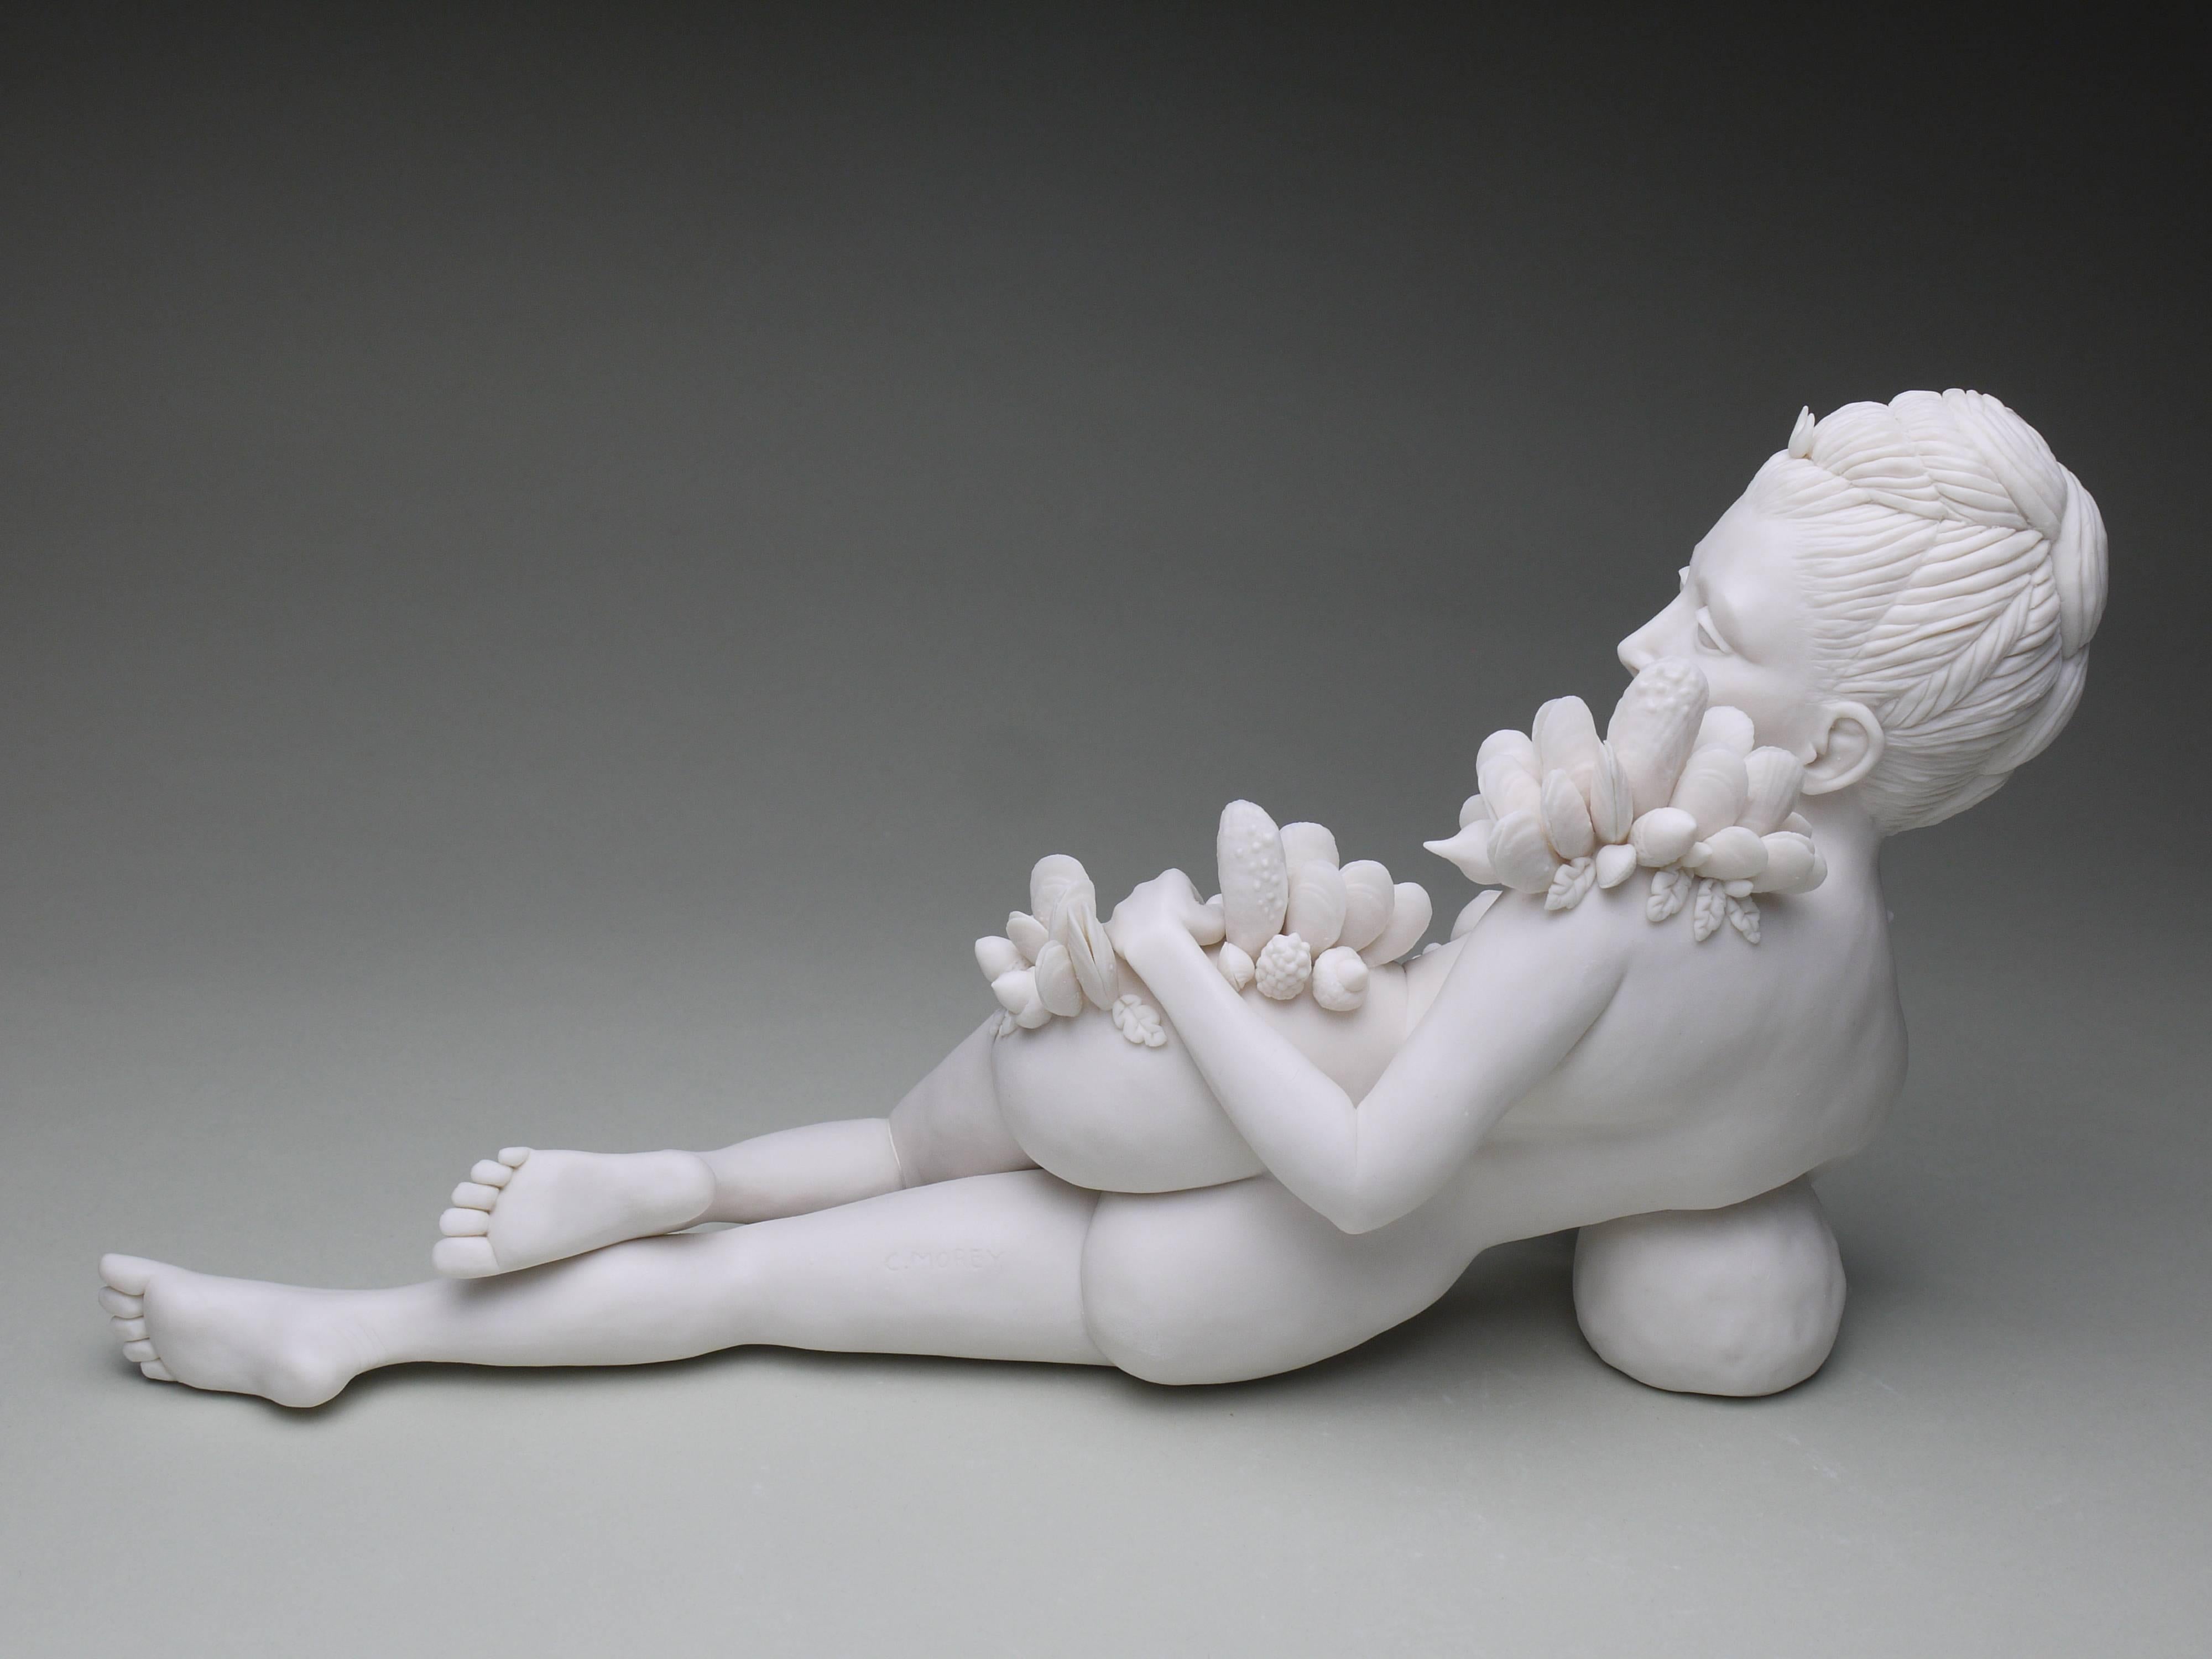 This is a nude, figurative sculpture. It is reference to the Greek goddess of the hunt: Diana. She is recumbent in the sculpture, and looking over her shoulder at the viewer. Mussel shells grow over her hips, shoulders, and arms. This piece is made